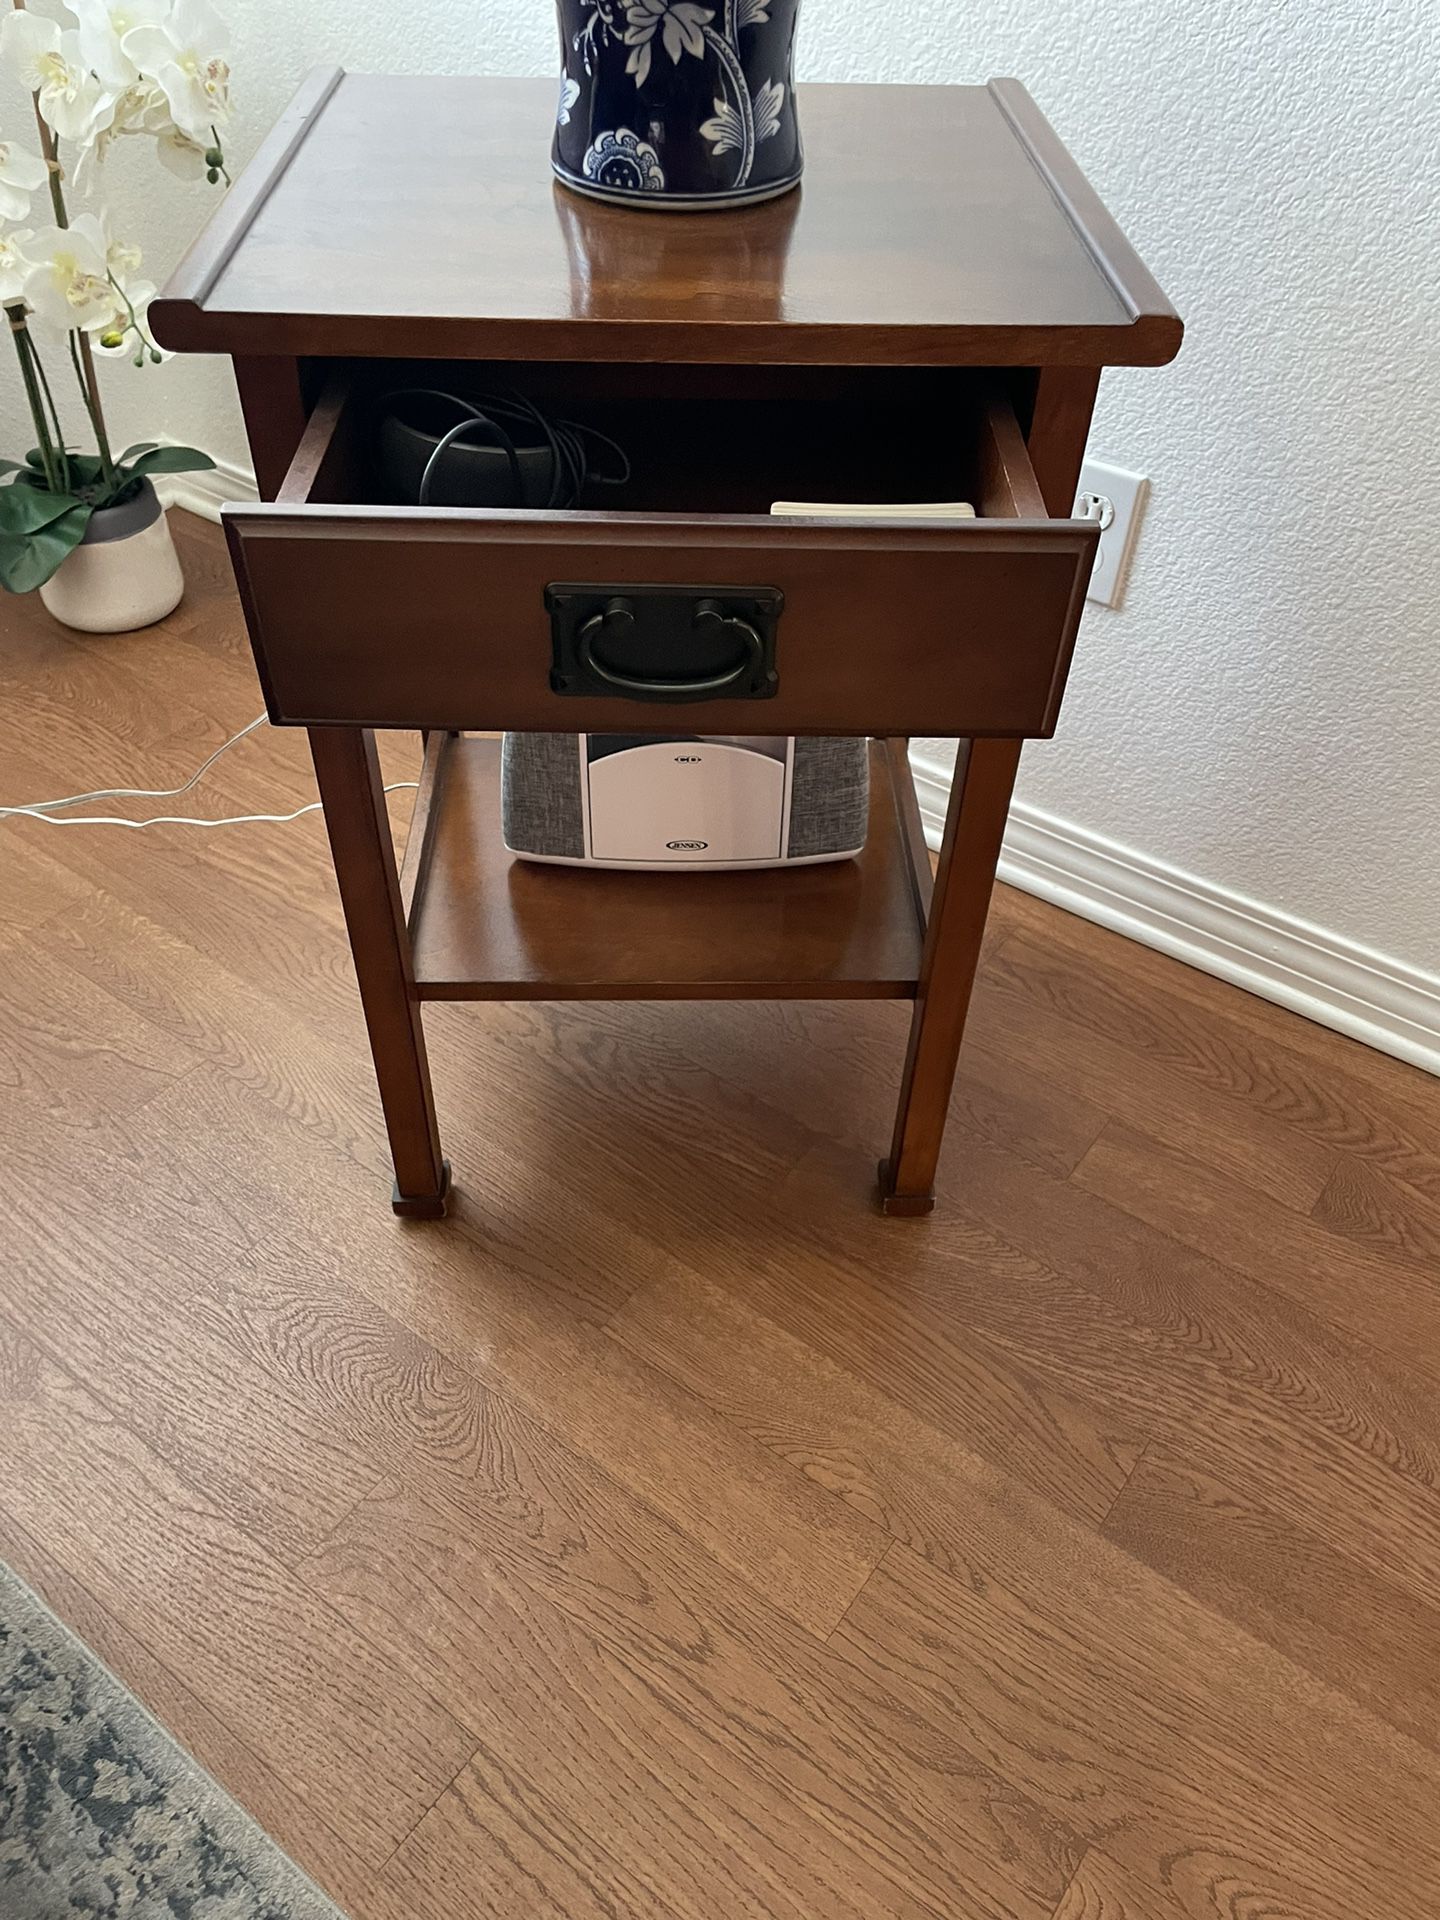 Two Maple End Tables For Living Room With Drawers And Great Condition